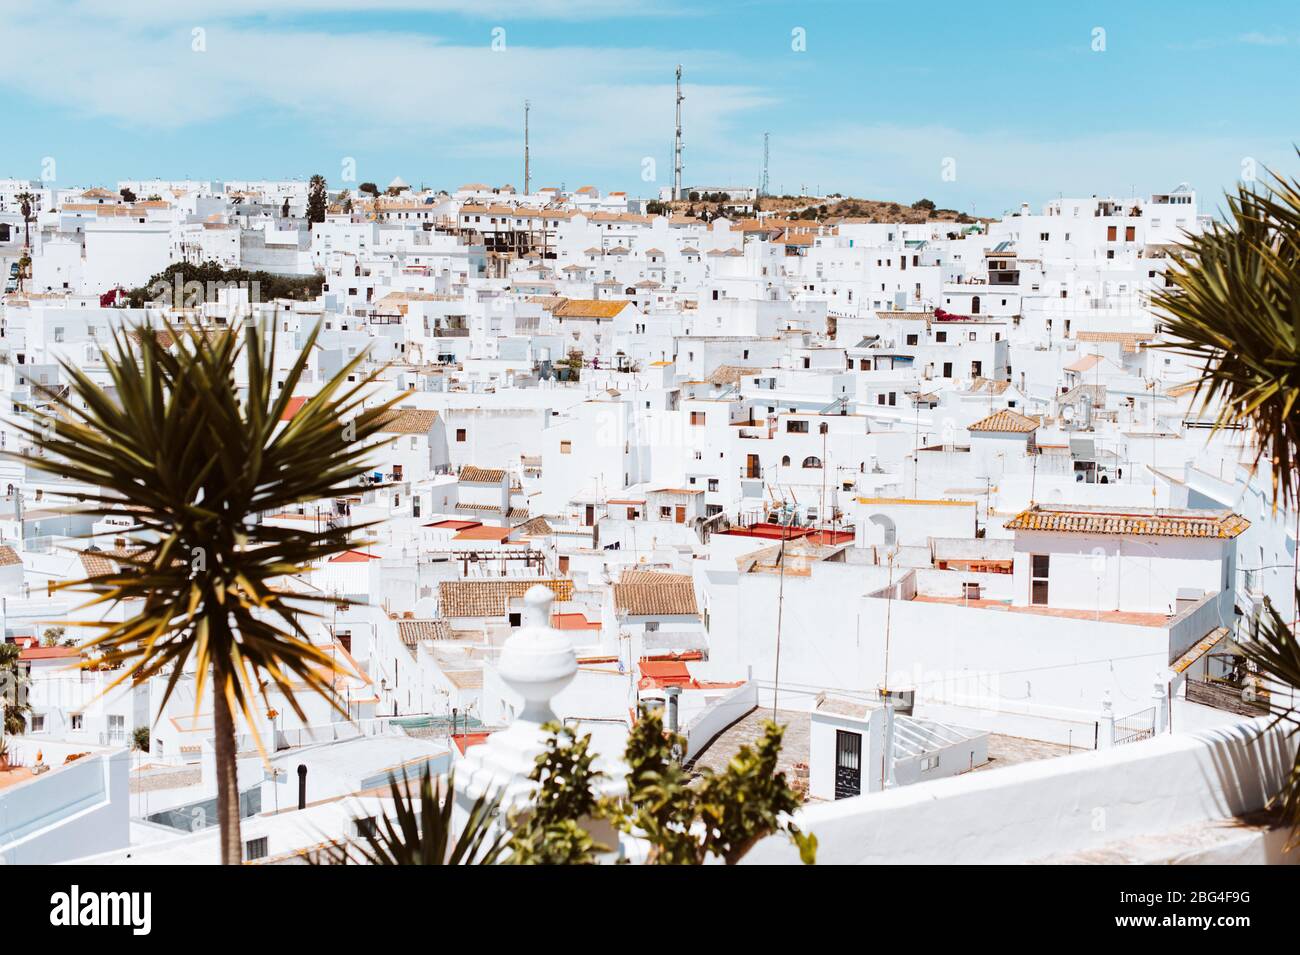 White village against blue sky with yucca trees in southern Spain Stock Photo